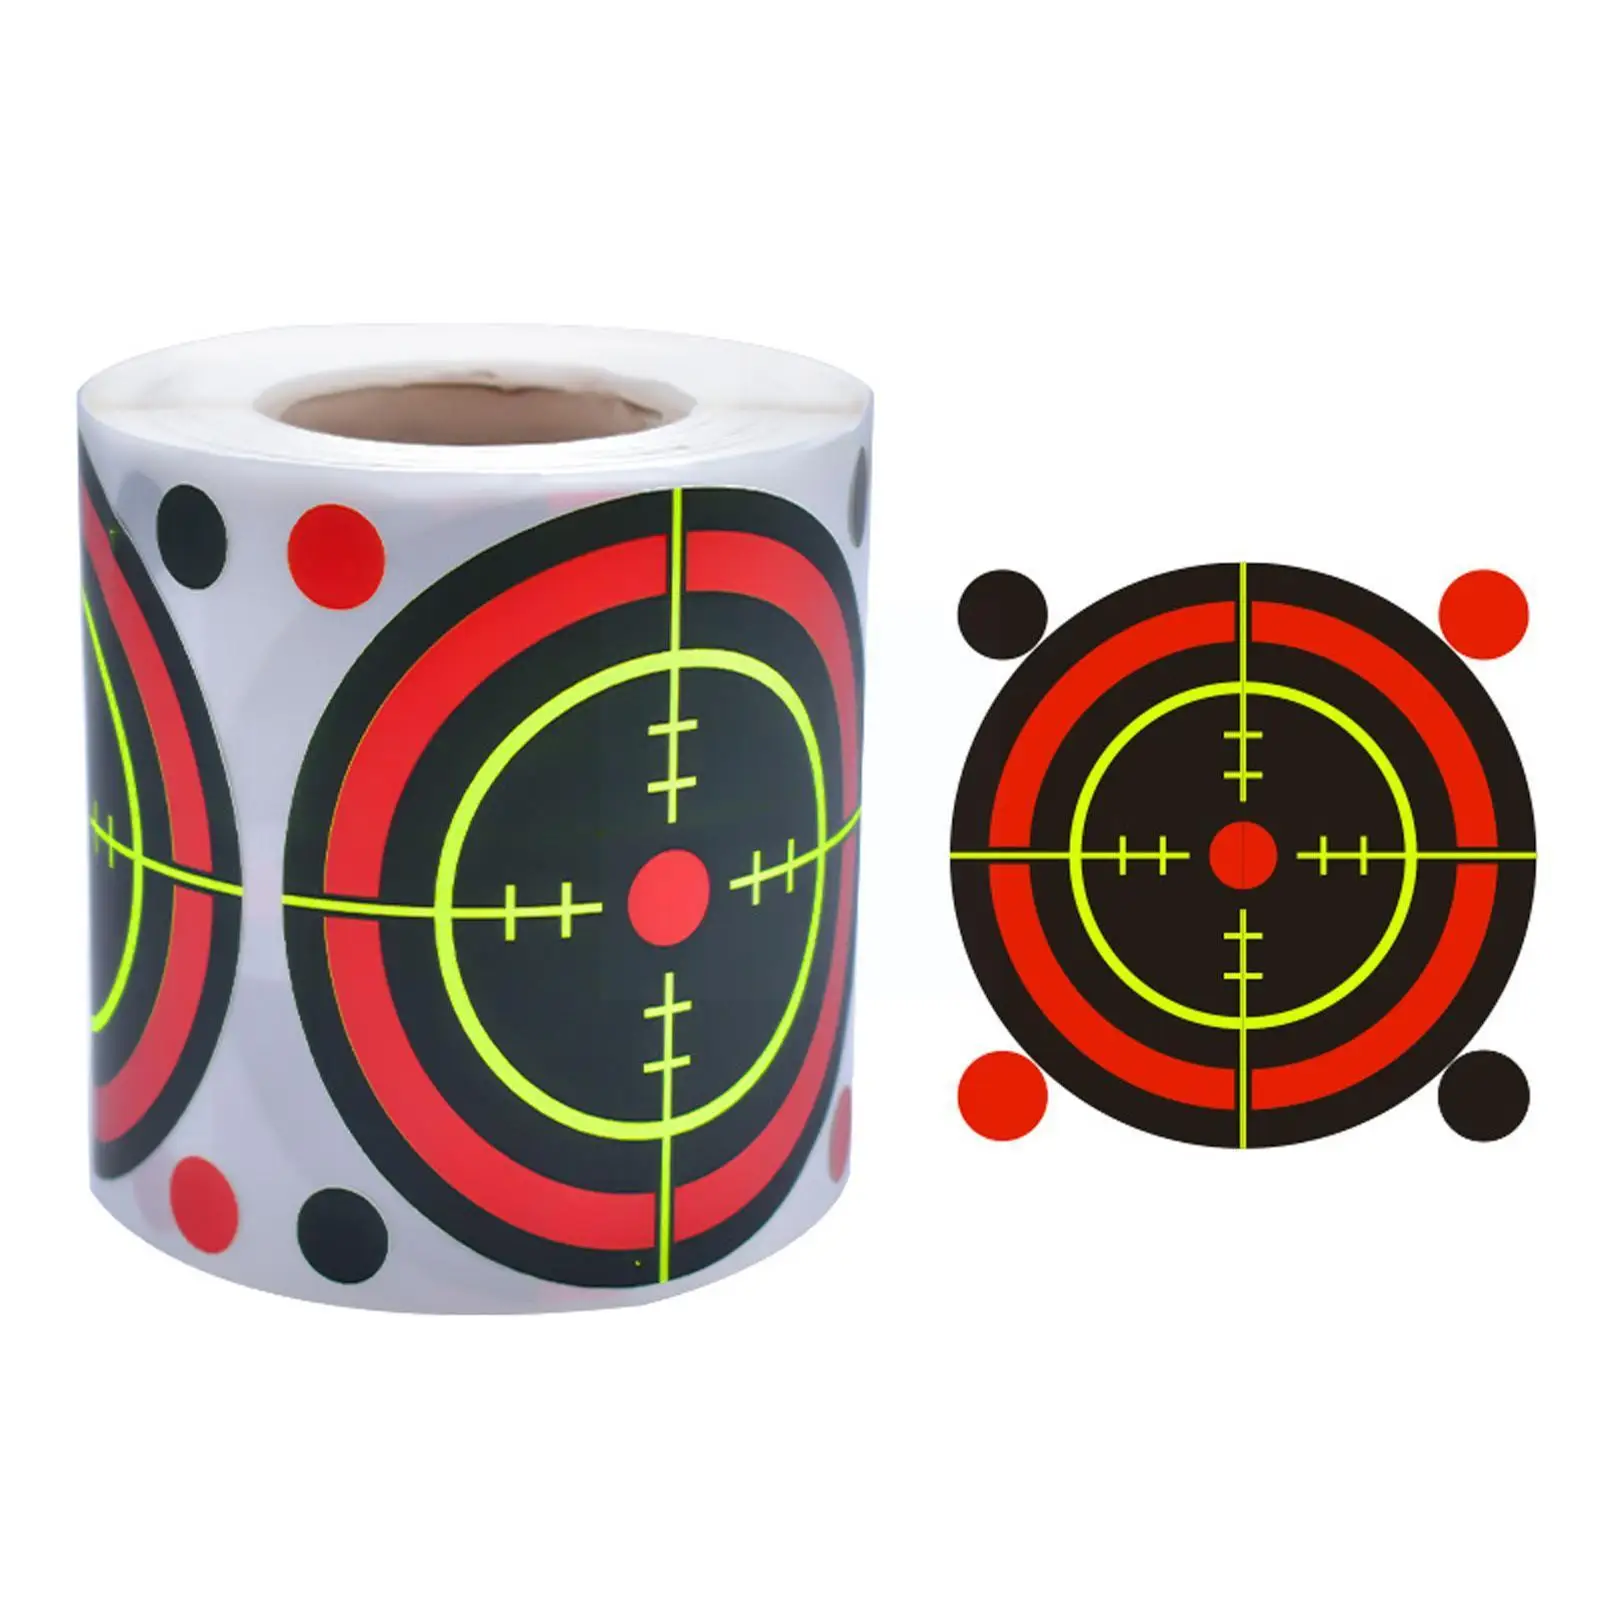 

Shooting Target Adhesive 200pcs/Roll Shoot Targets Splatter Reactive Stickers for Archery Bow Hunting Practice Training Tar T1D5